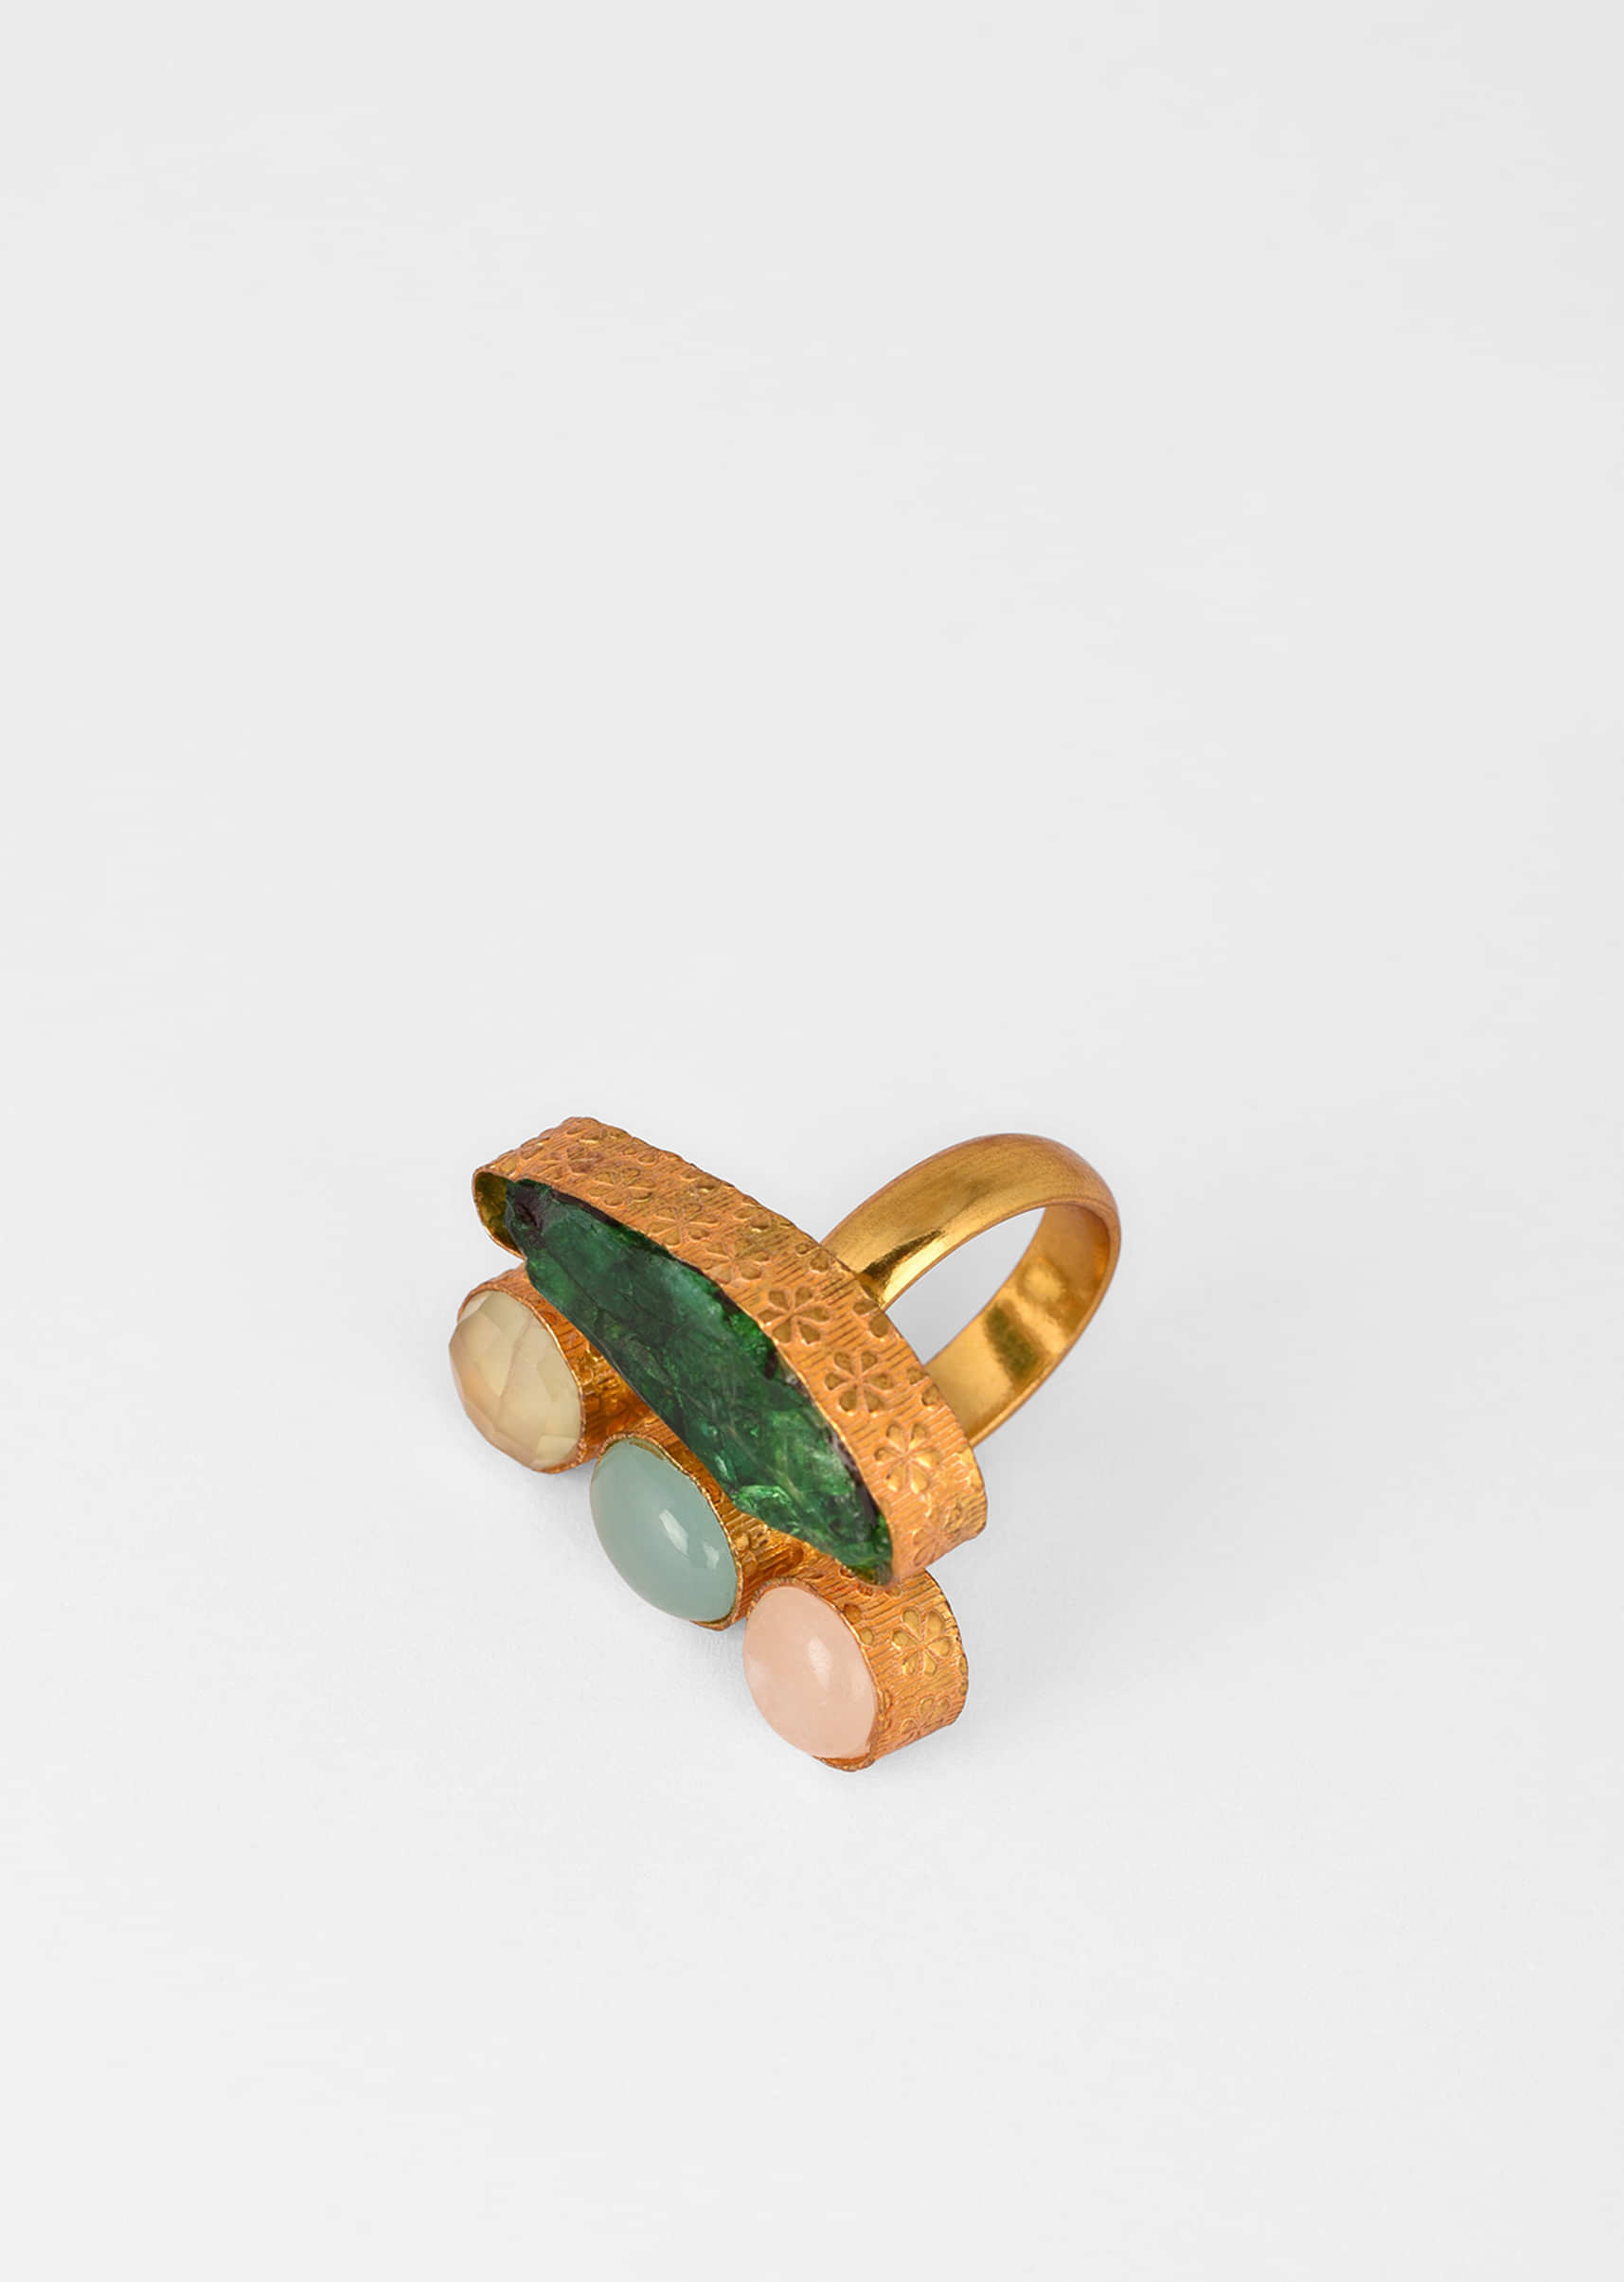 Multi Colored Ring With Abstract Green Semi Precious Stone And Tiny Stones In Pastel Hues 